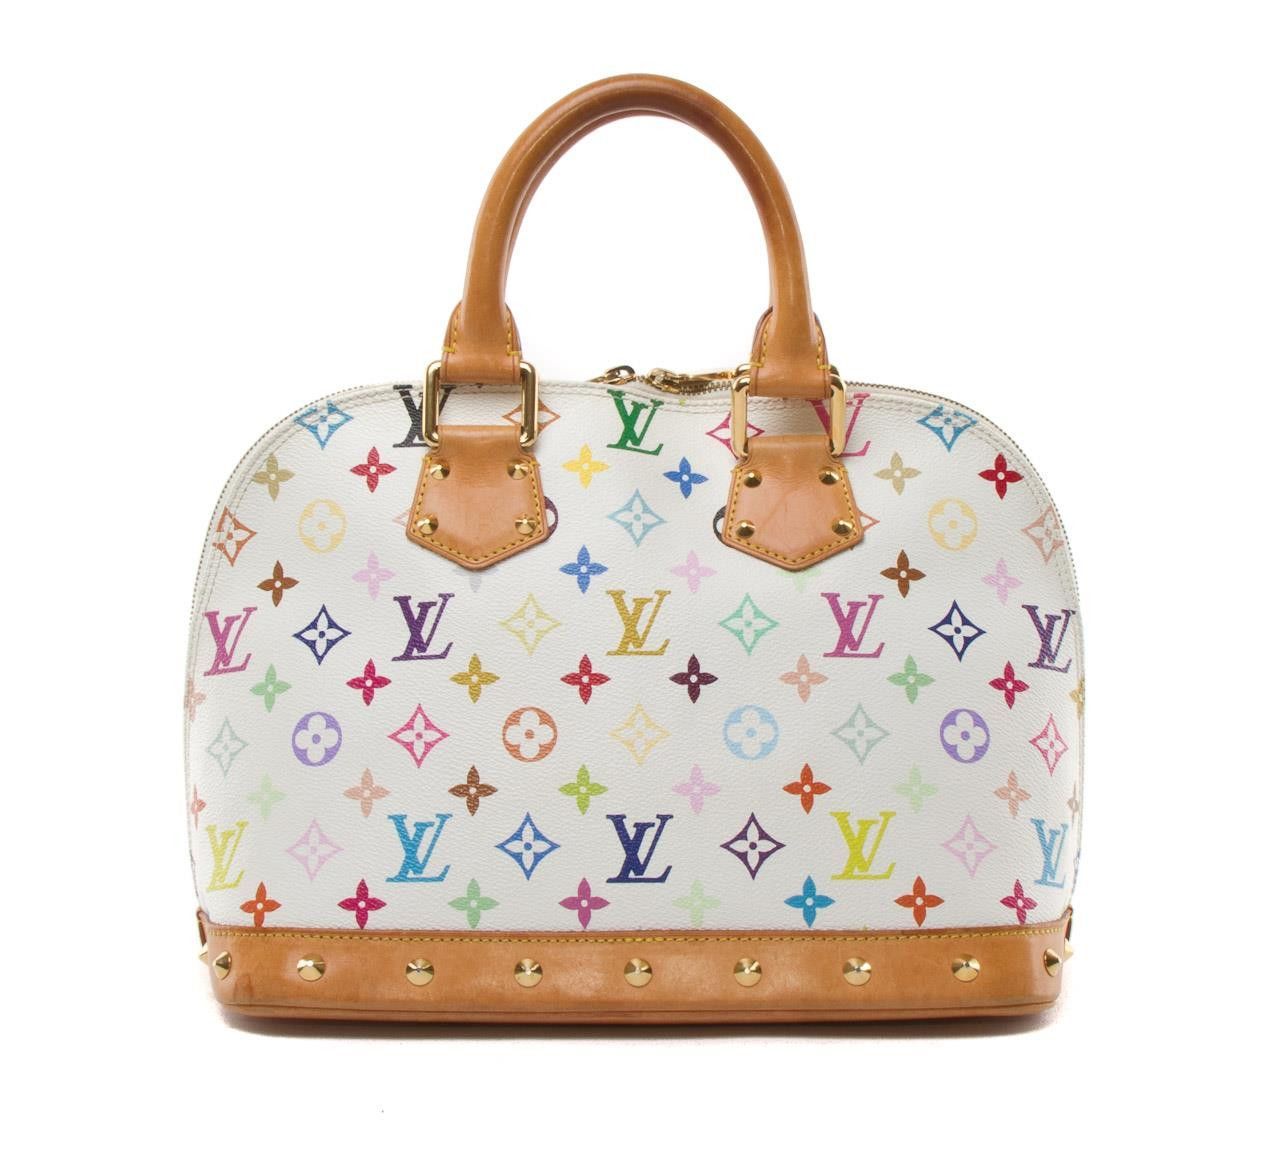 Multicolored Louie Vuitton Hand Bag Tribute with Nail Wraps - My Pizza Fridays